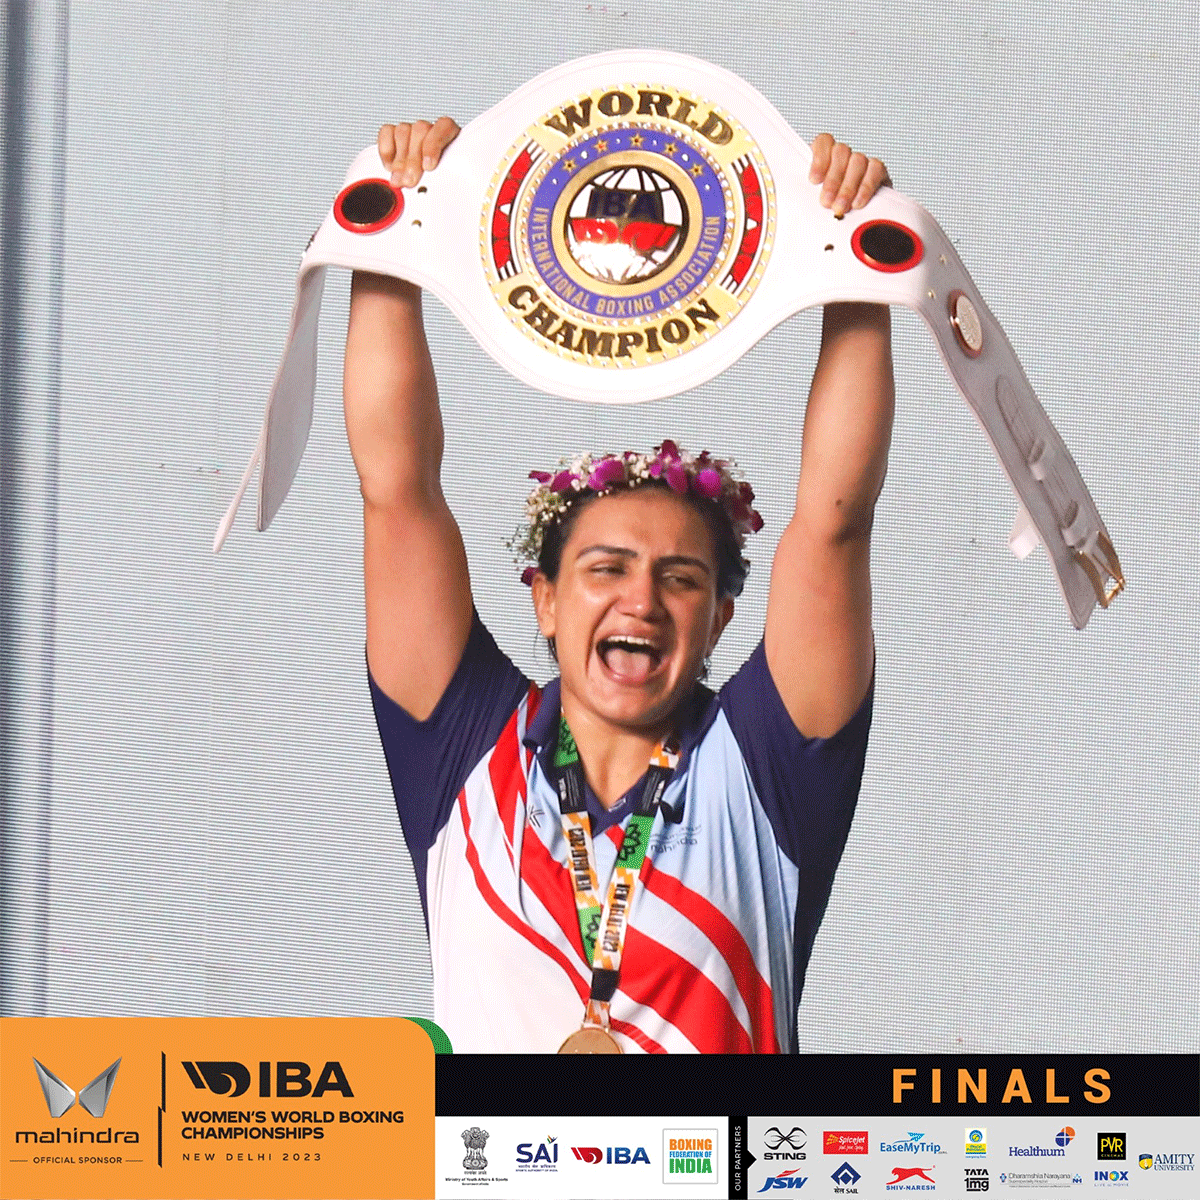 Light heavyweight (81kg) category winner, India's Saweety Boora is ecstatic on being crowned world champion